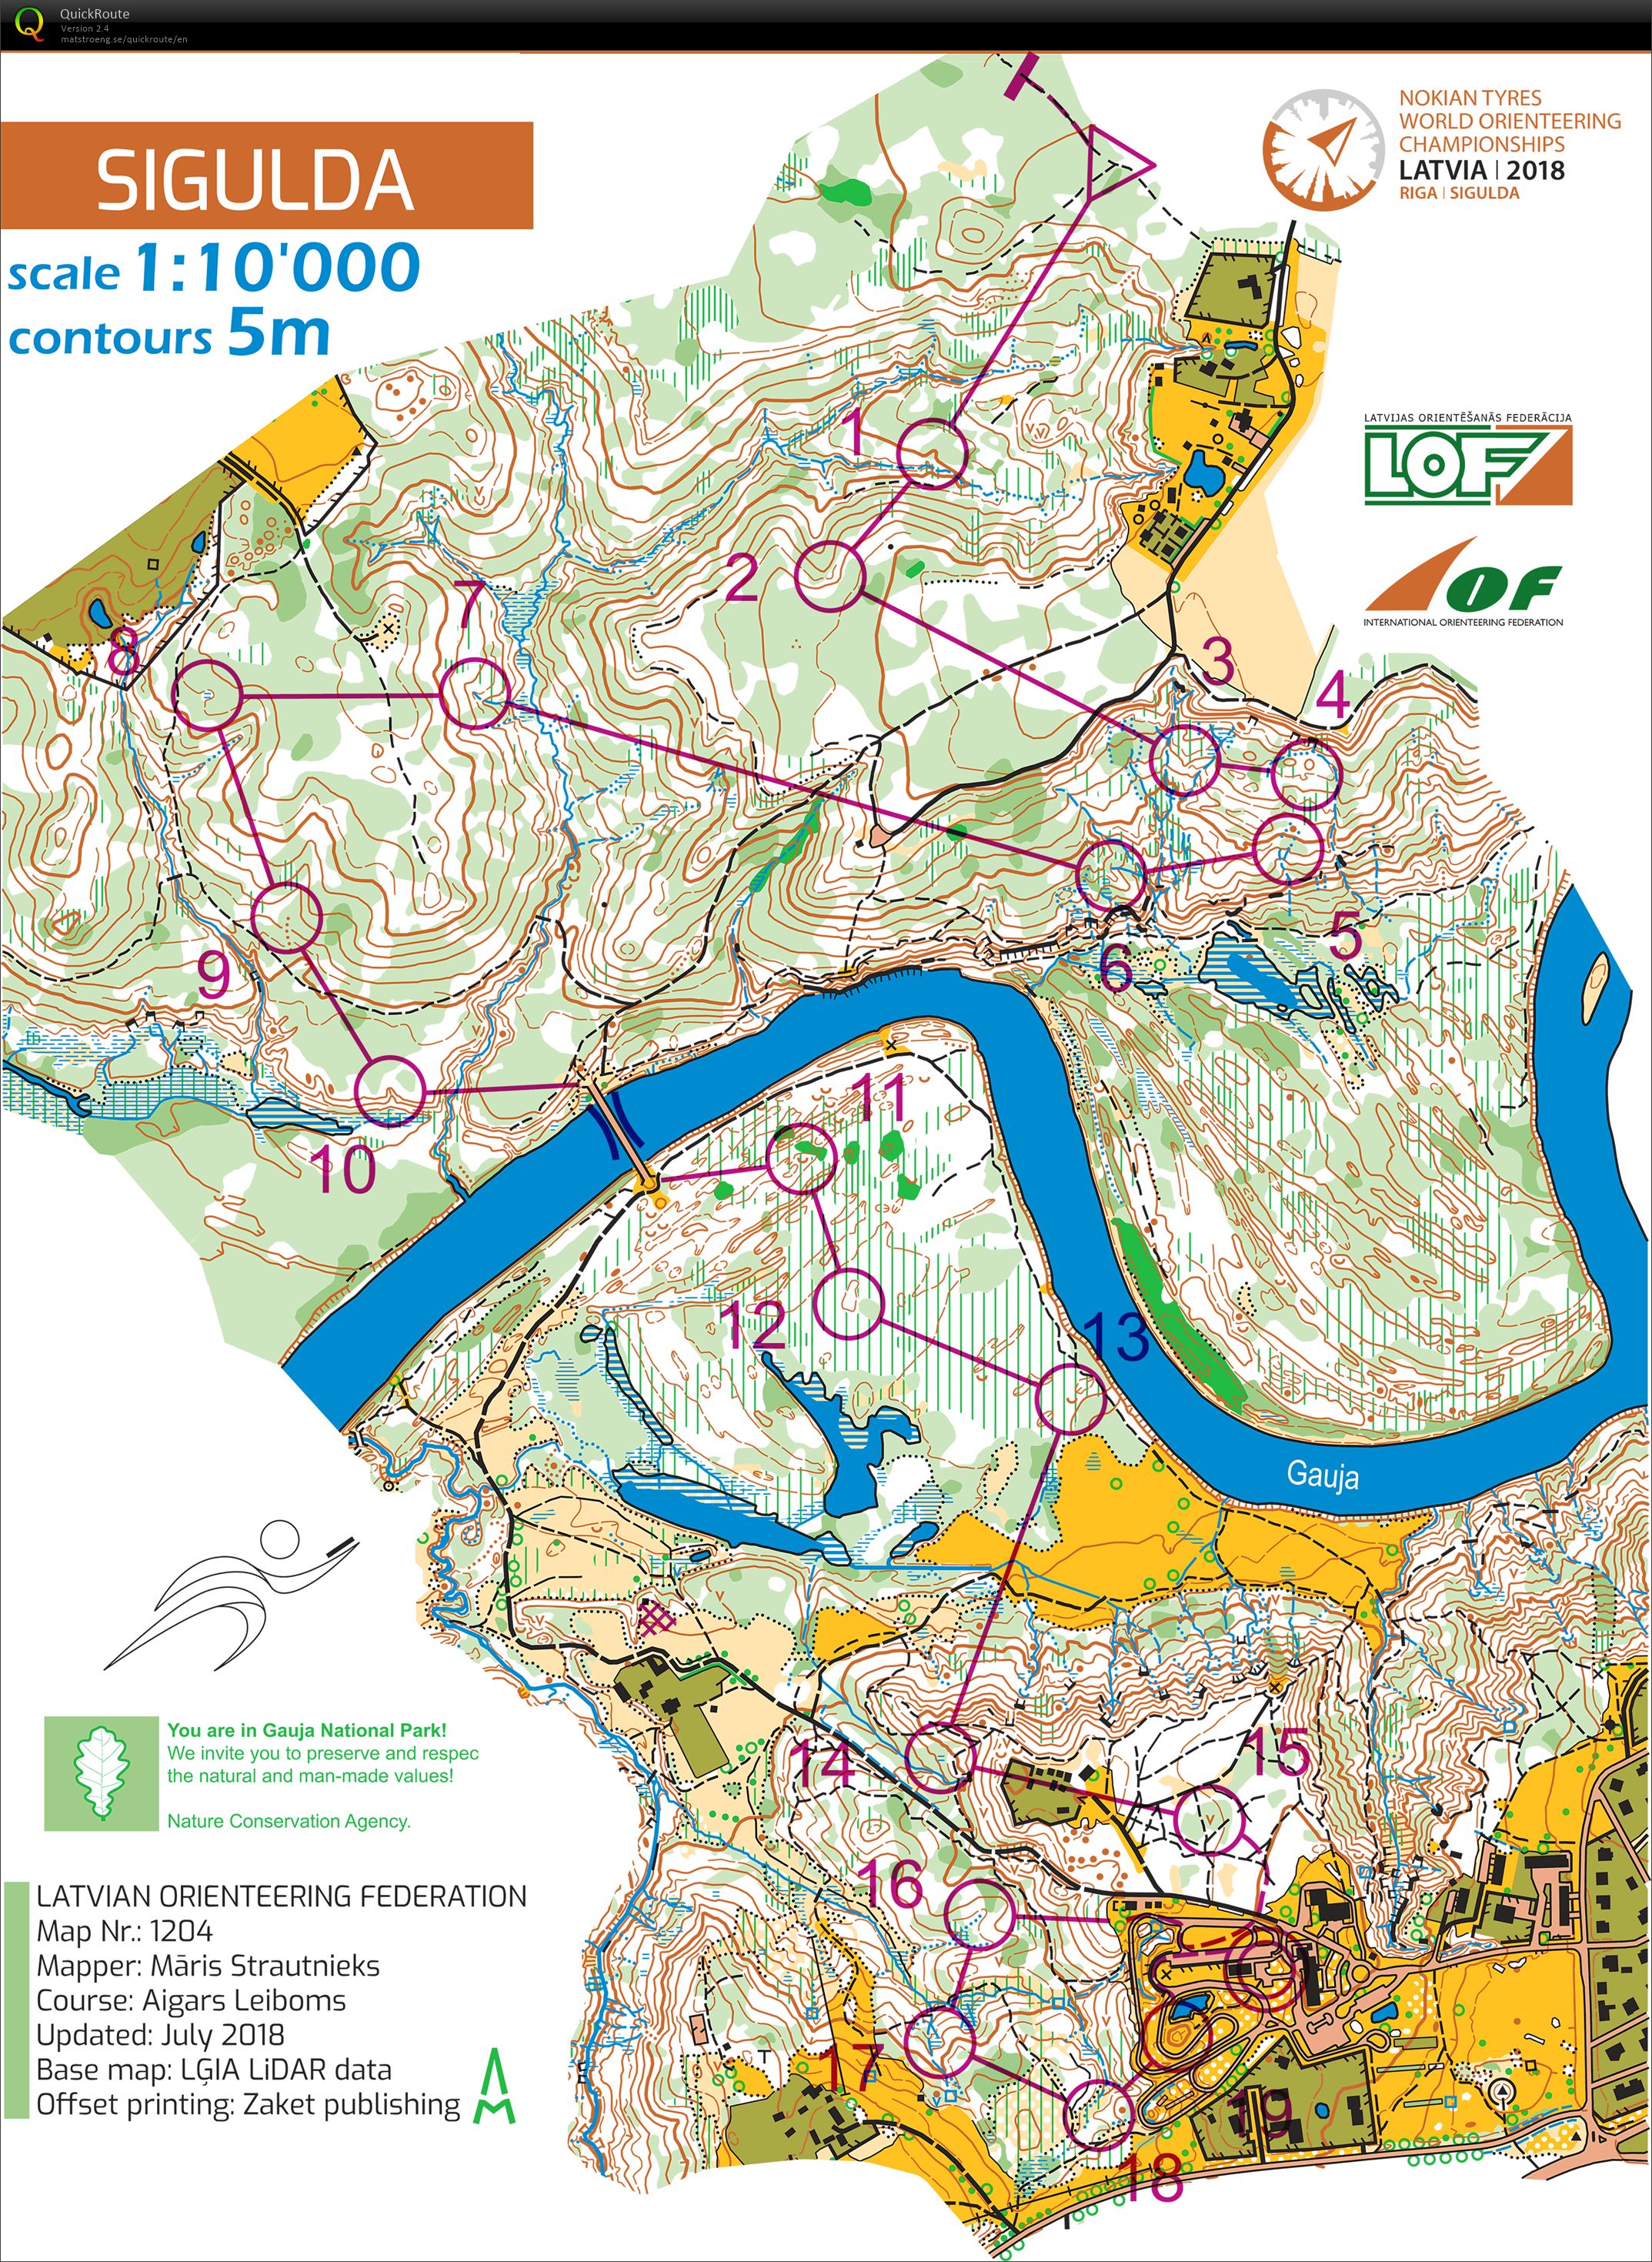 WOC 2018 Middle (07-08-2018)